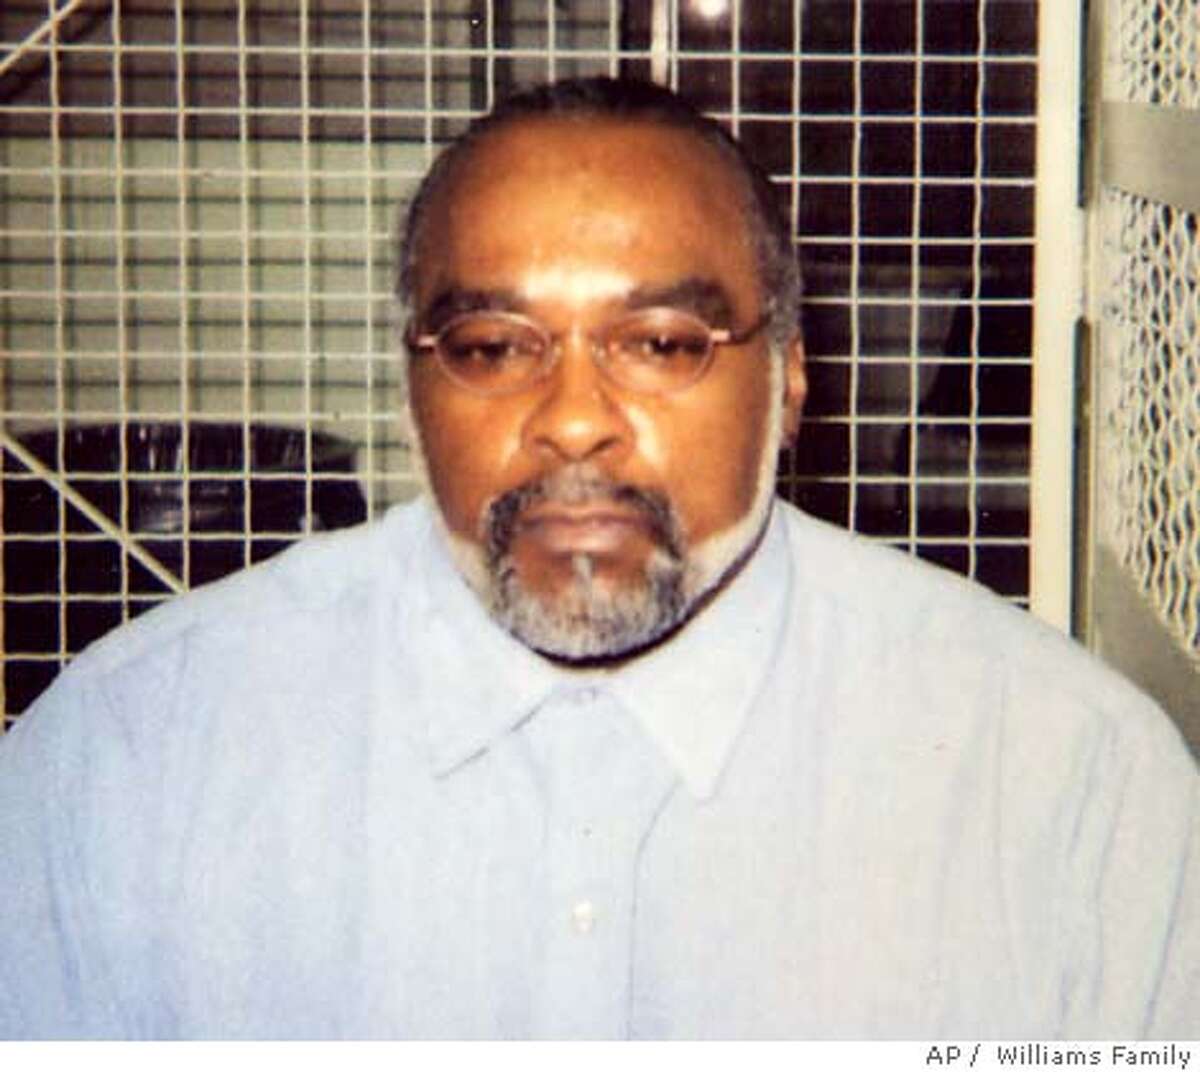 ** FILE ** In this undated photo provided by the family of Stanley Williams, Stanley "Tookie" Williams poses for a photo in the visiting area of San Quentin State Prison in California. Prosecutors asked the California Supreme Court on Sunday, Dec. 11, 2005 to reject former gang leader and convicted killer Williams' request to block his execution, set for early Tuesday. (AP Photo/Courtesy of Williams Family, File) Ran on: 12-12-2005 Ran on: 12-12-2005